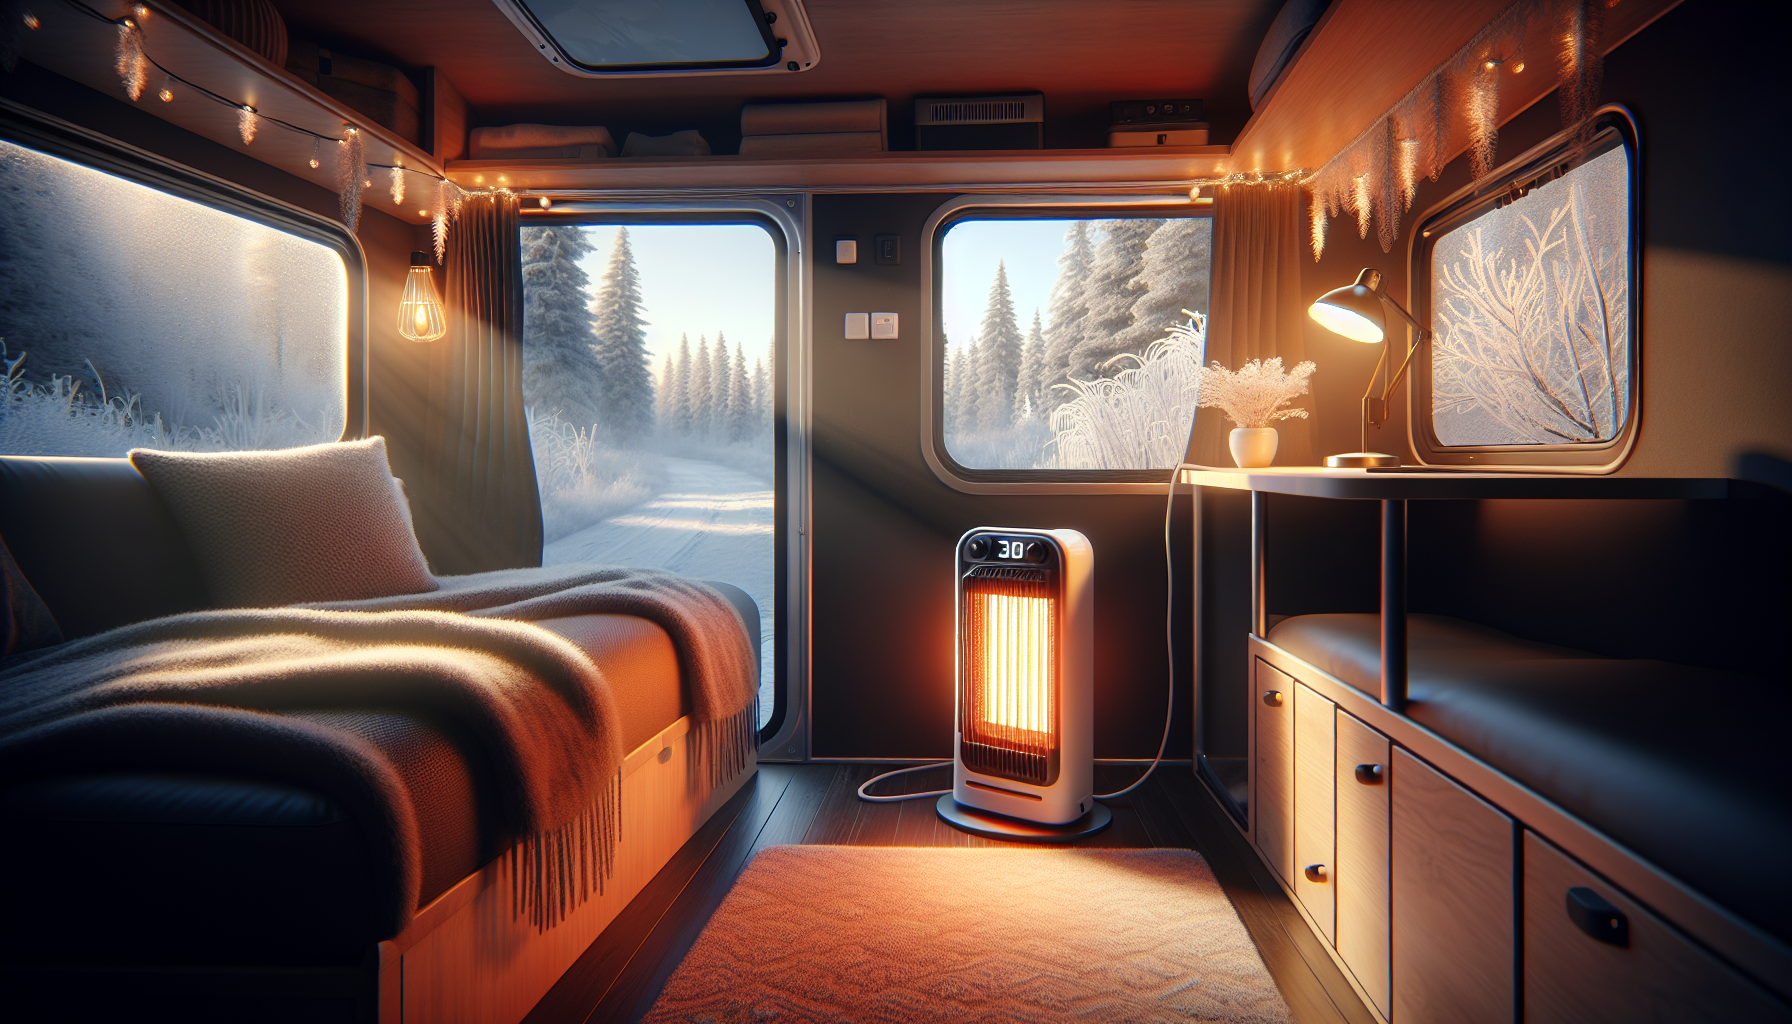 Can Space Heaters Prevent Freezing in a Camper During Cold Weather?